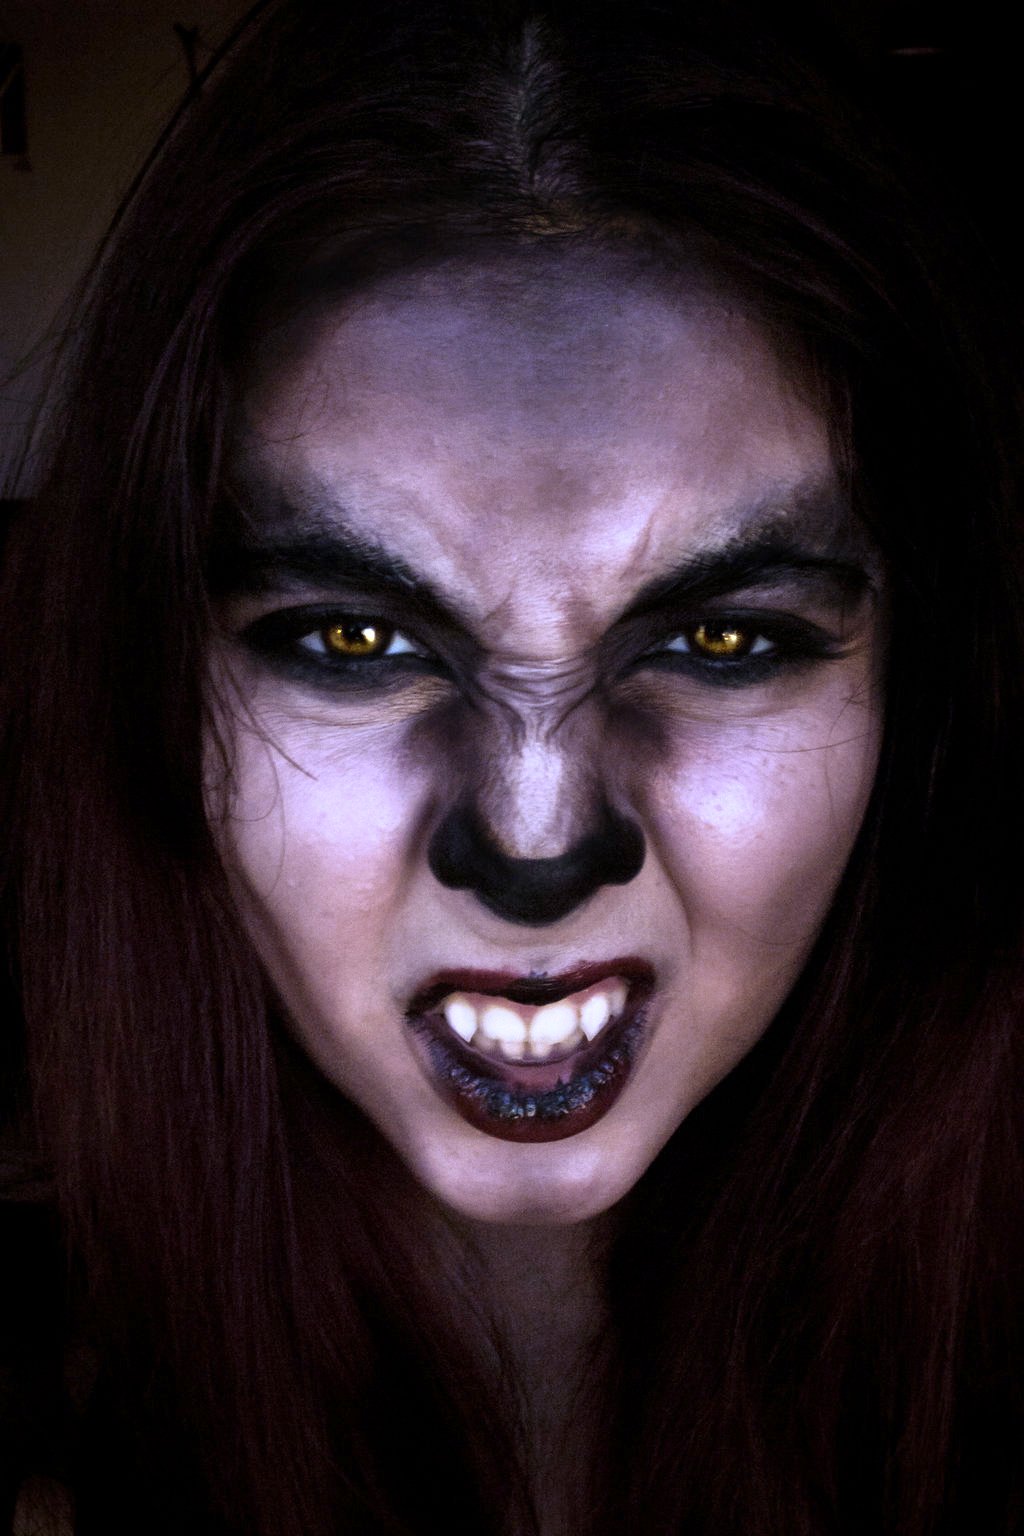 Wolf inspired make-up